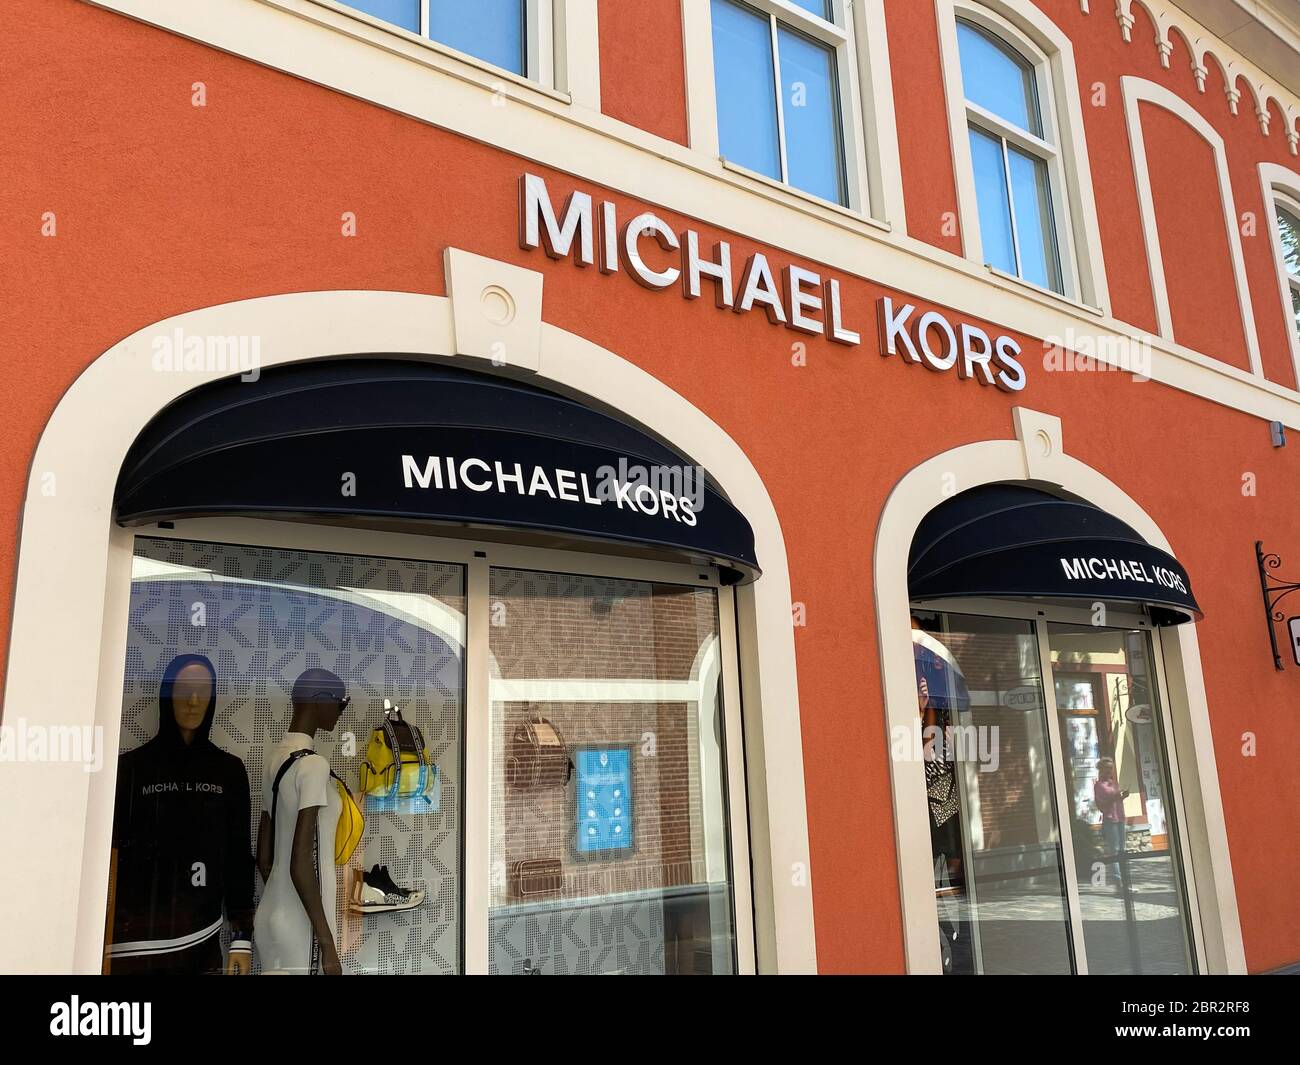 Roermond, Netherlands - May 19. 2020: View on facade with logo lettering of Michael  Kors fashion company at shop entrance Stock Photo - Alamy